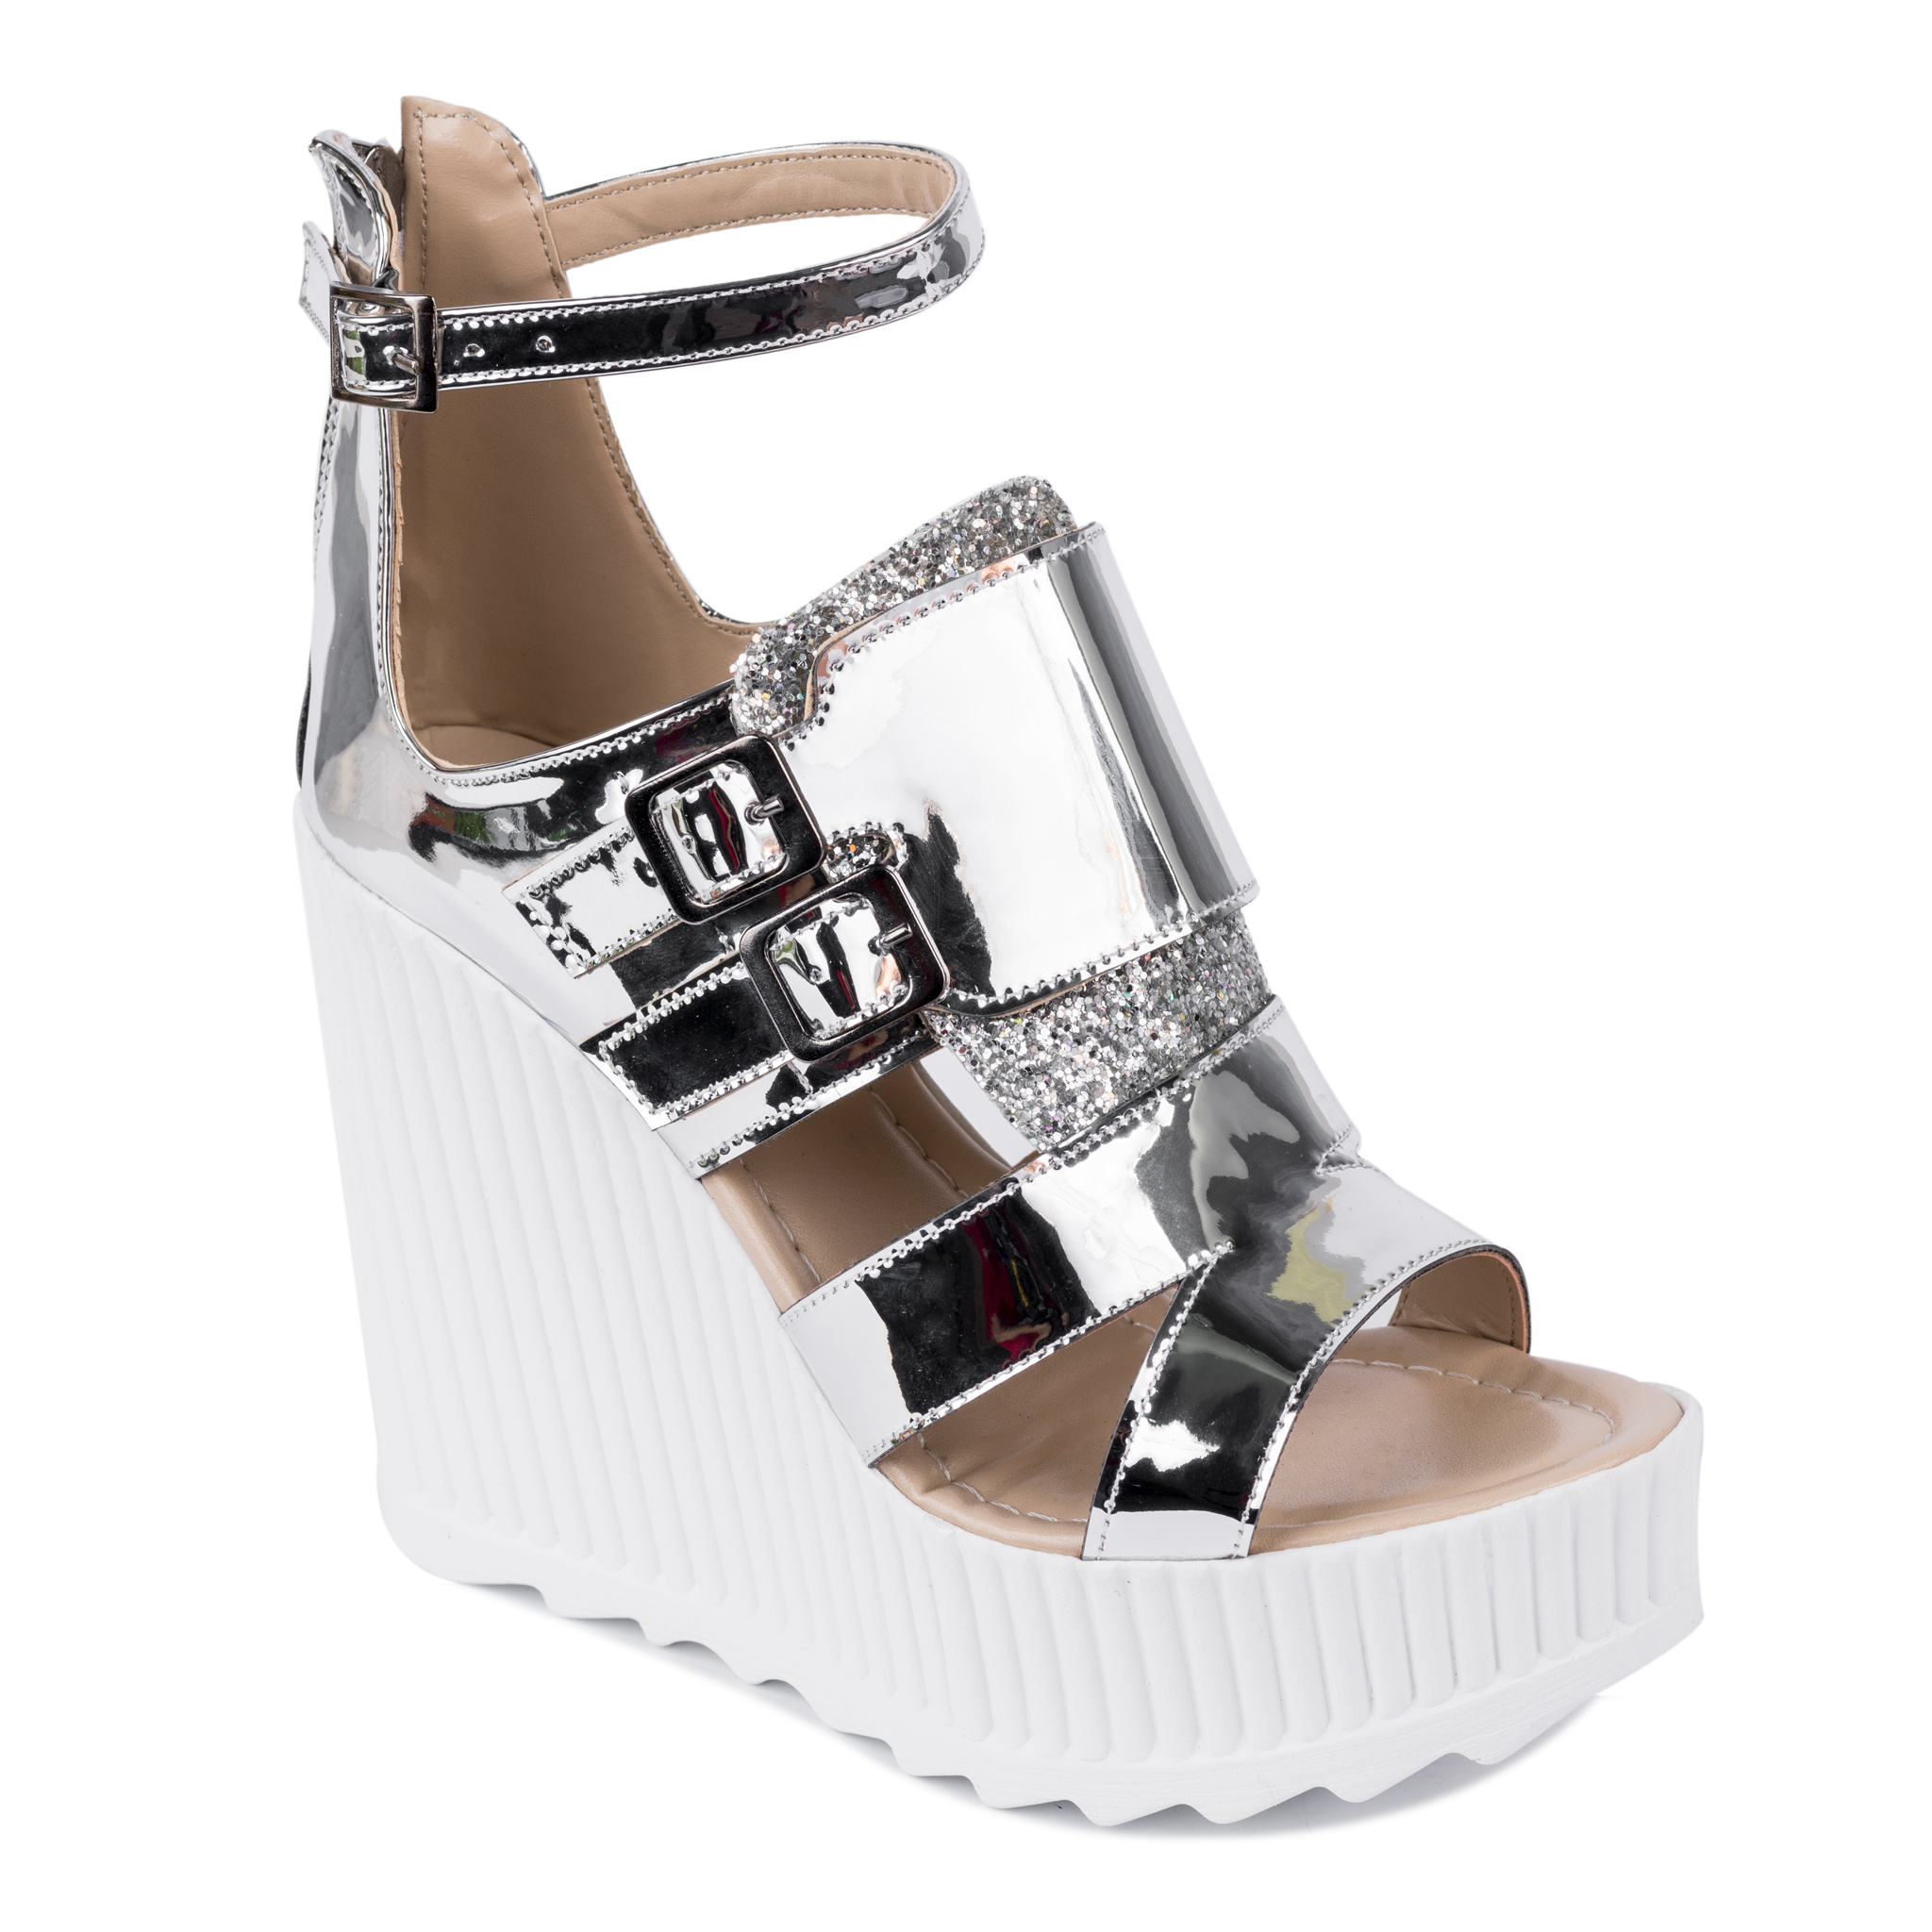 PATENT WEDGE SANDALS WITH BELTS - SILVER